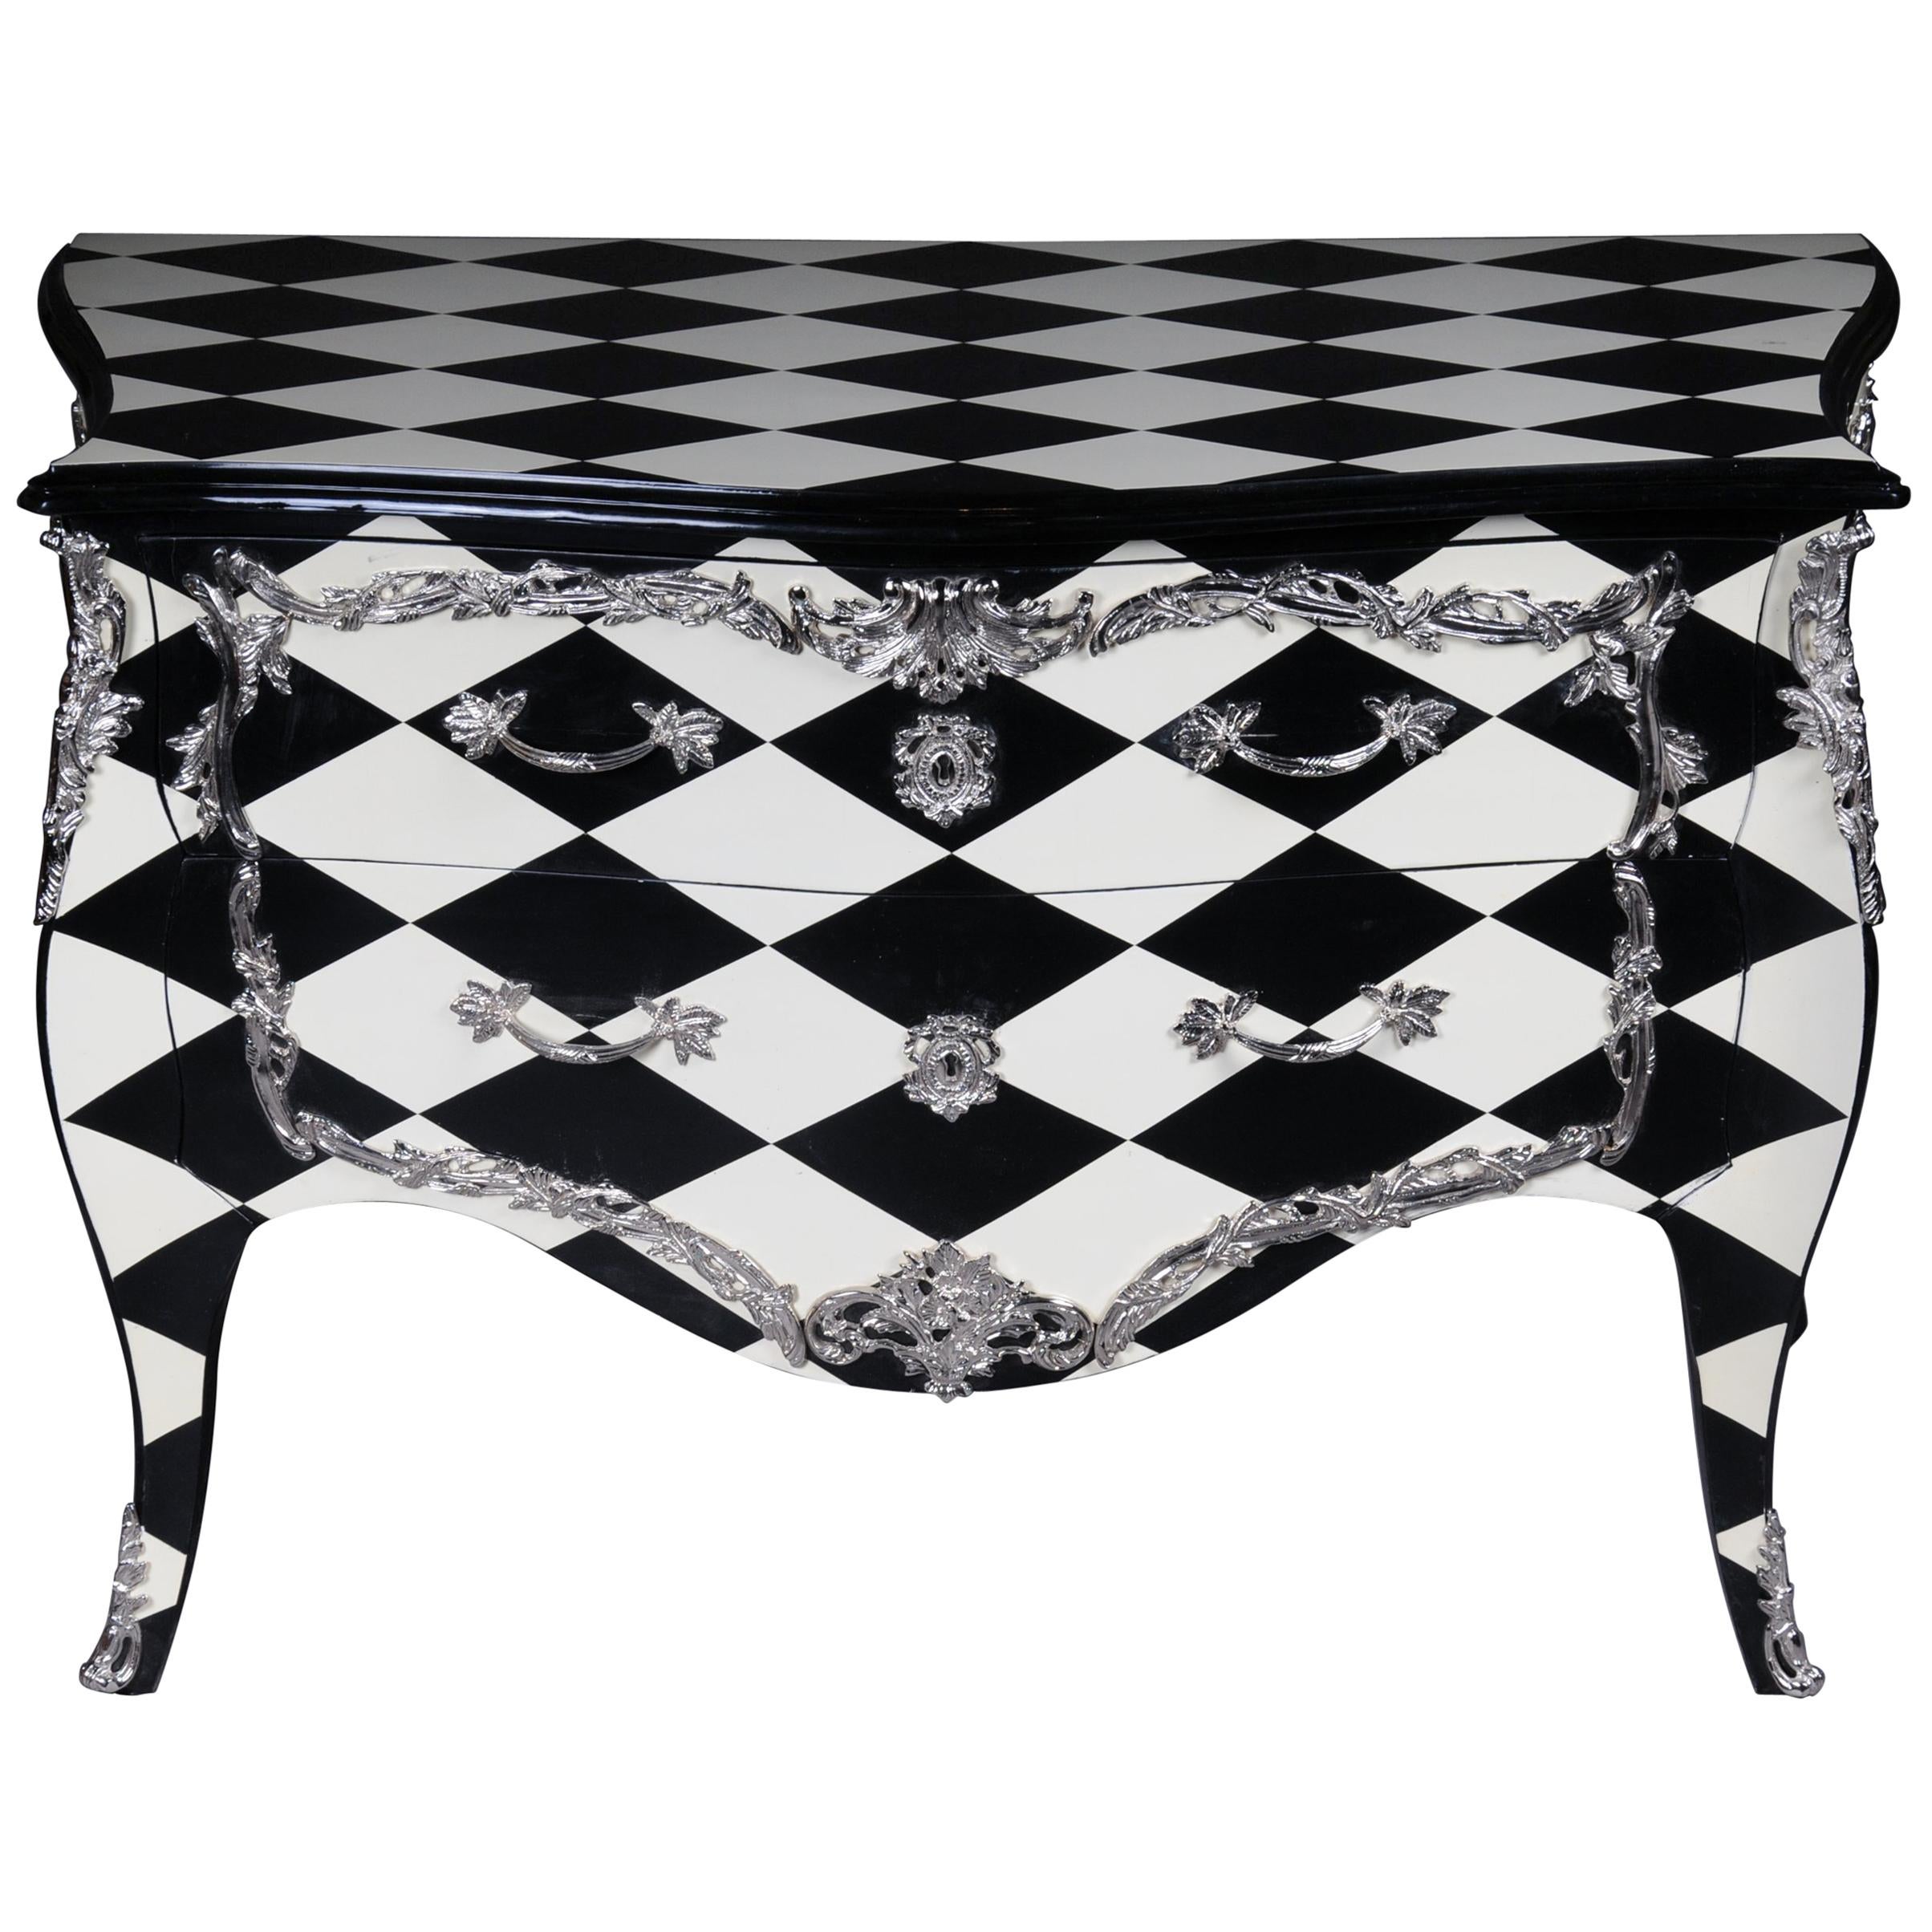 Designer Commode in Louis XV, Chessboard Pattern, Black and White